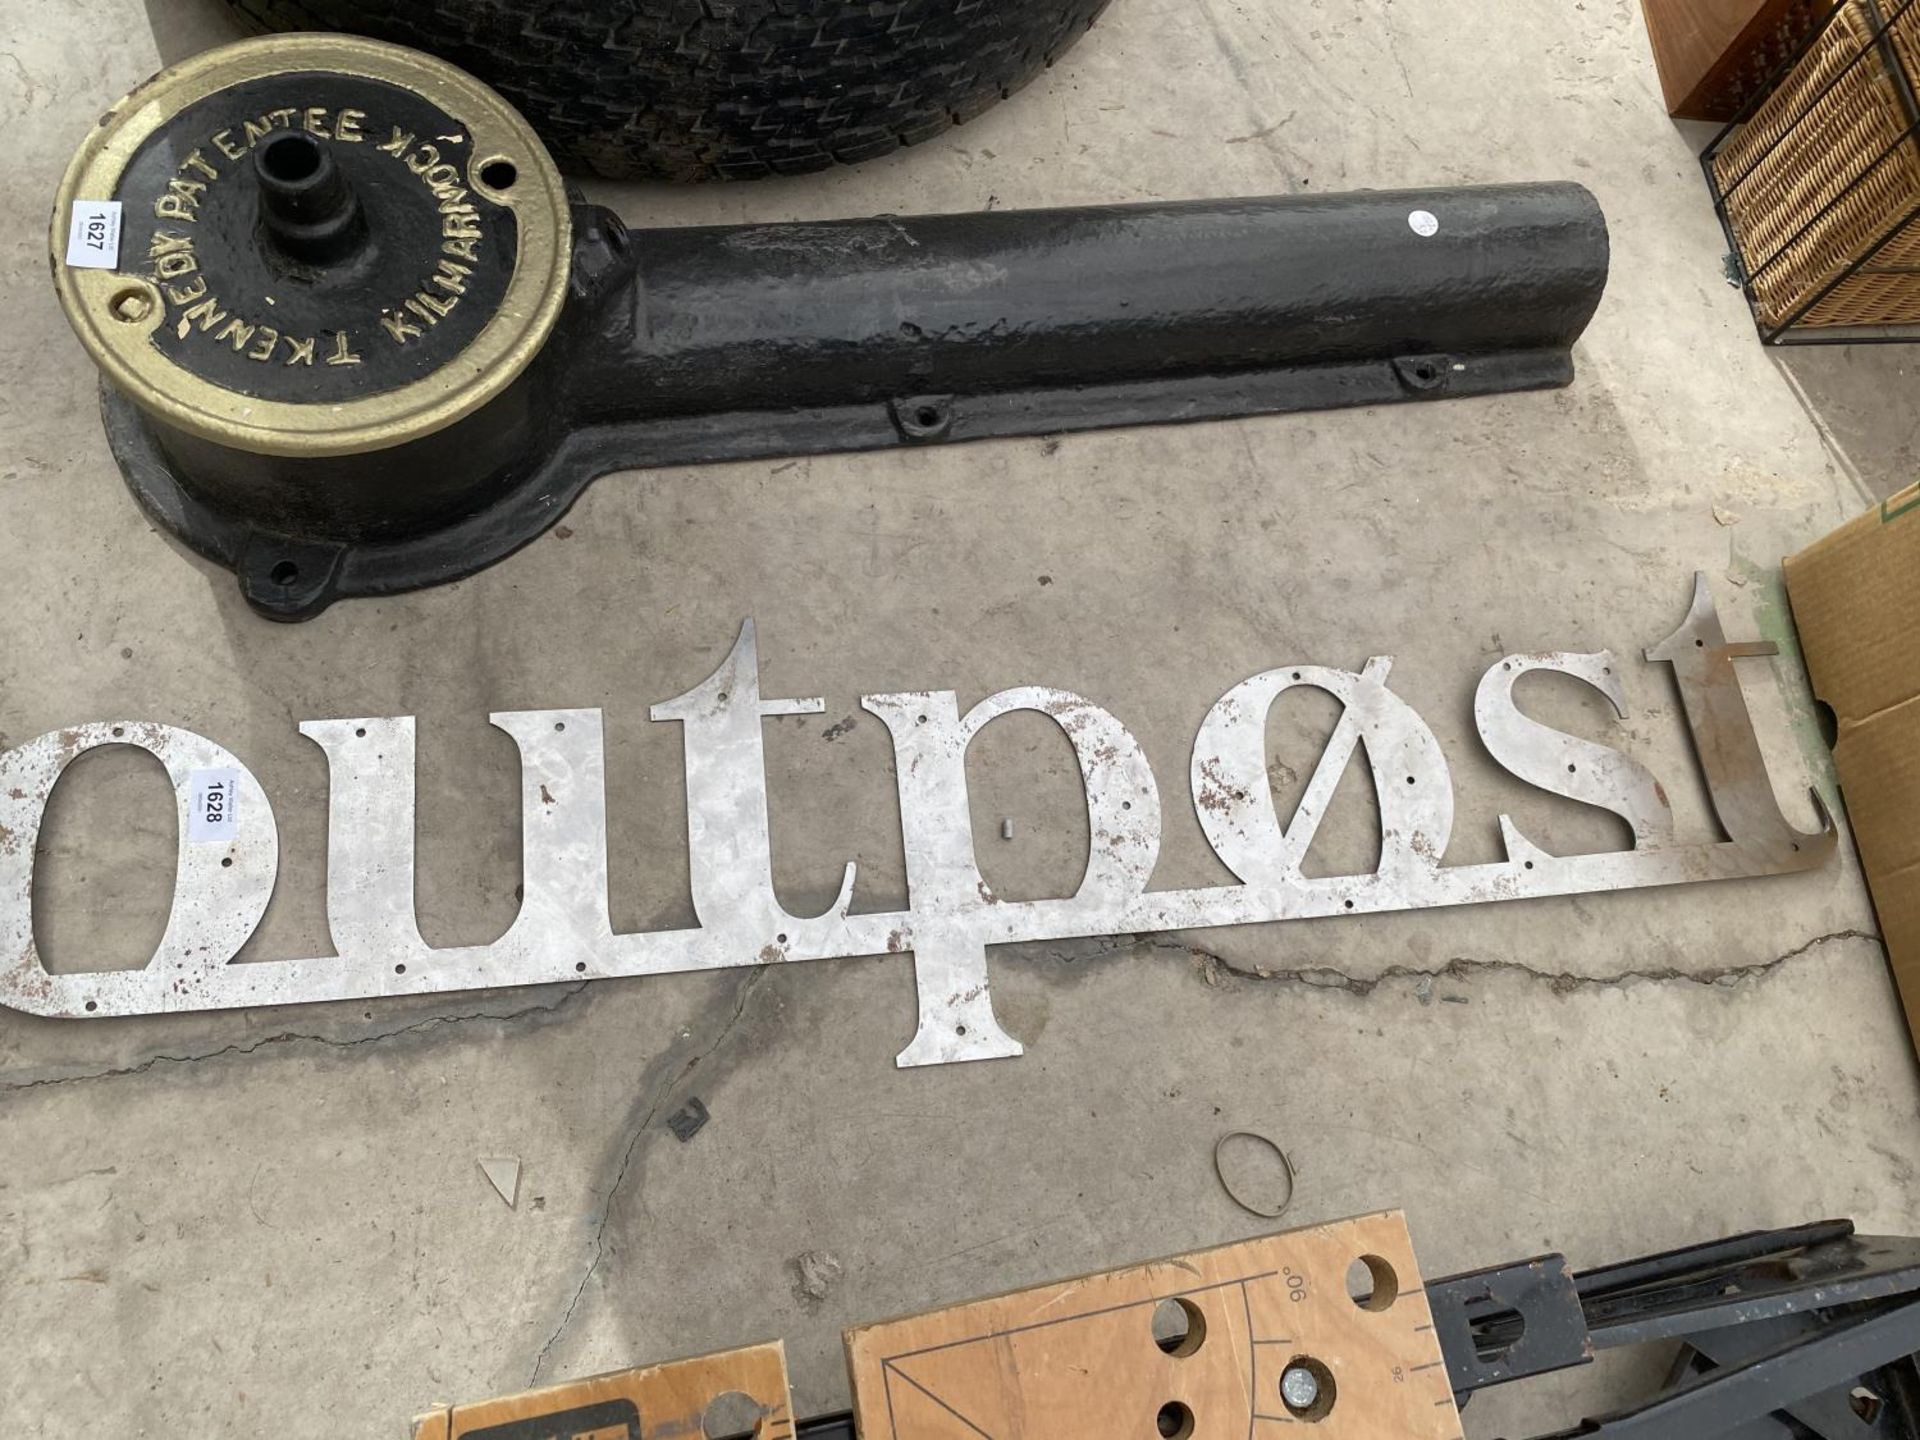 A LARGE METAL 'OUTPOST' SIGN